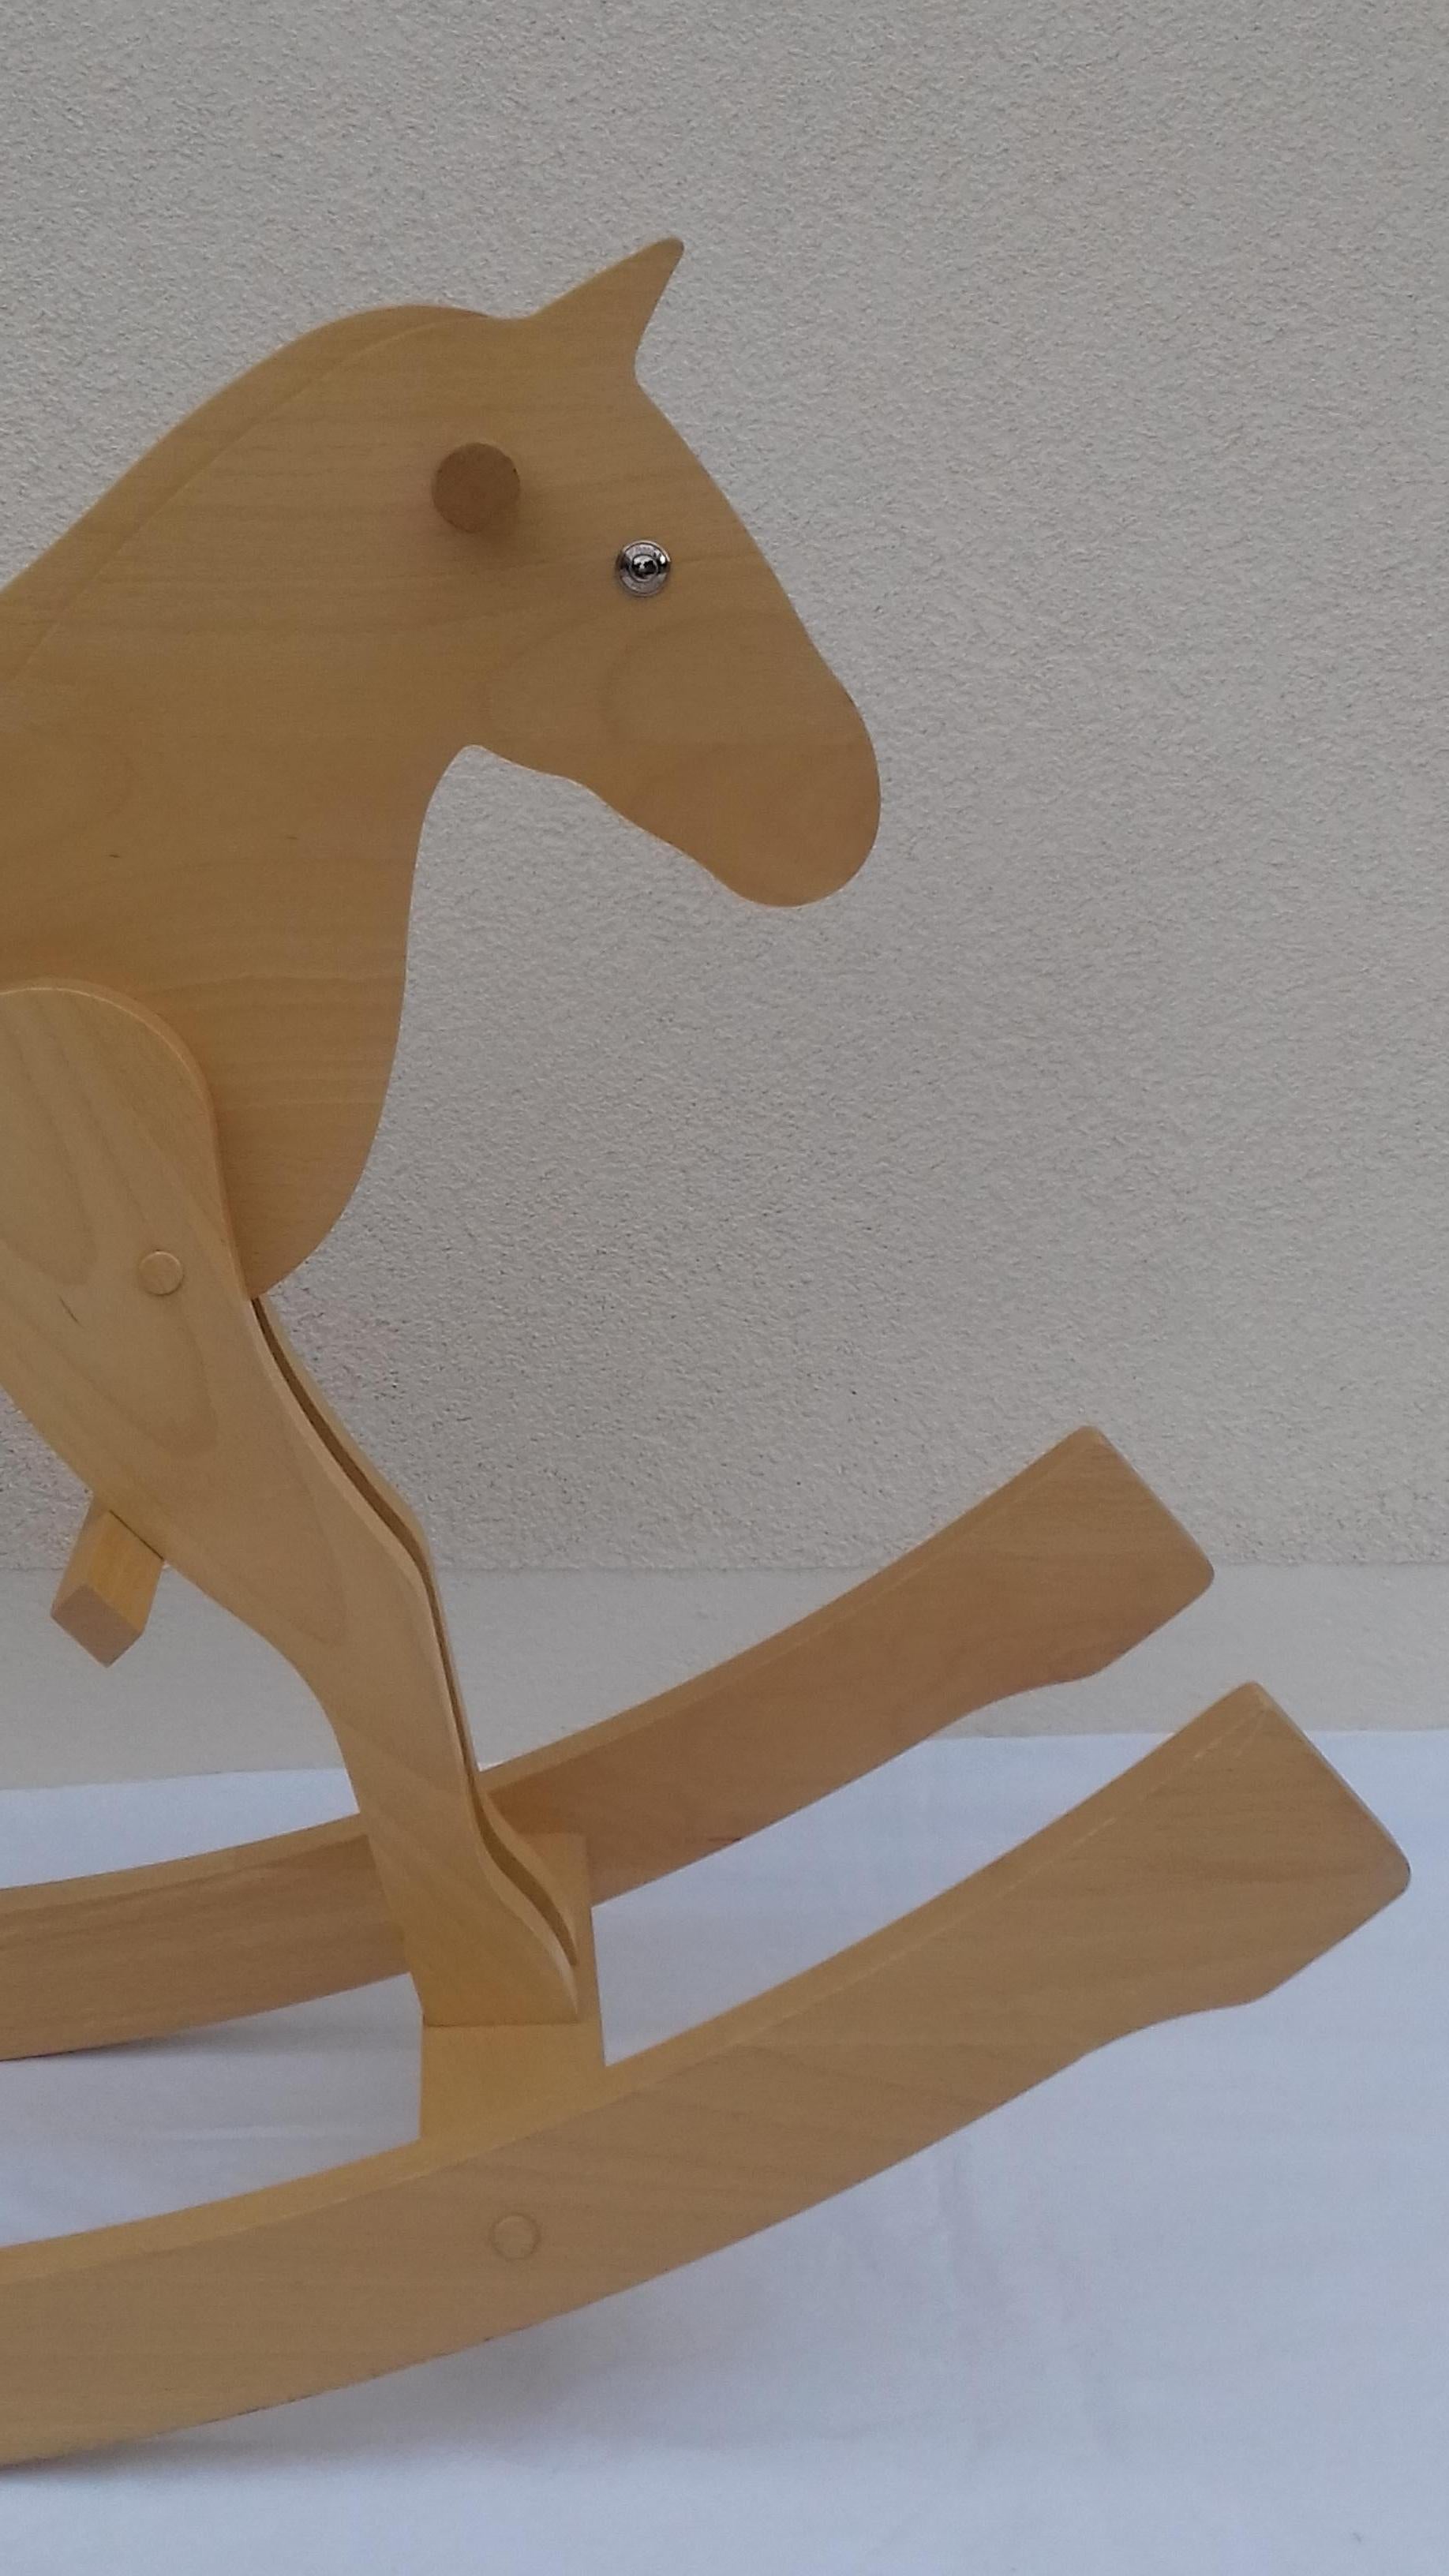 Authentic Hermès Rocking Horse

Made of Beechwood

Eyes are made of silver-tone metal button, 